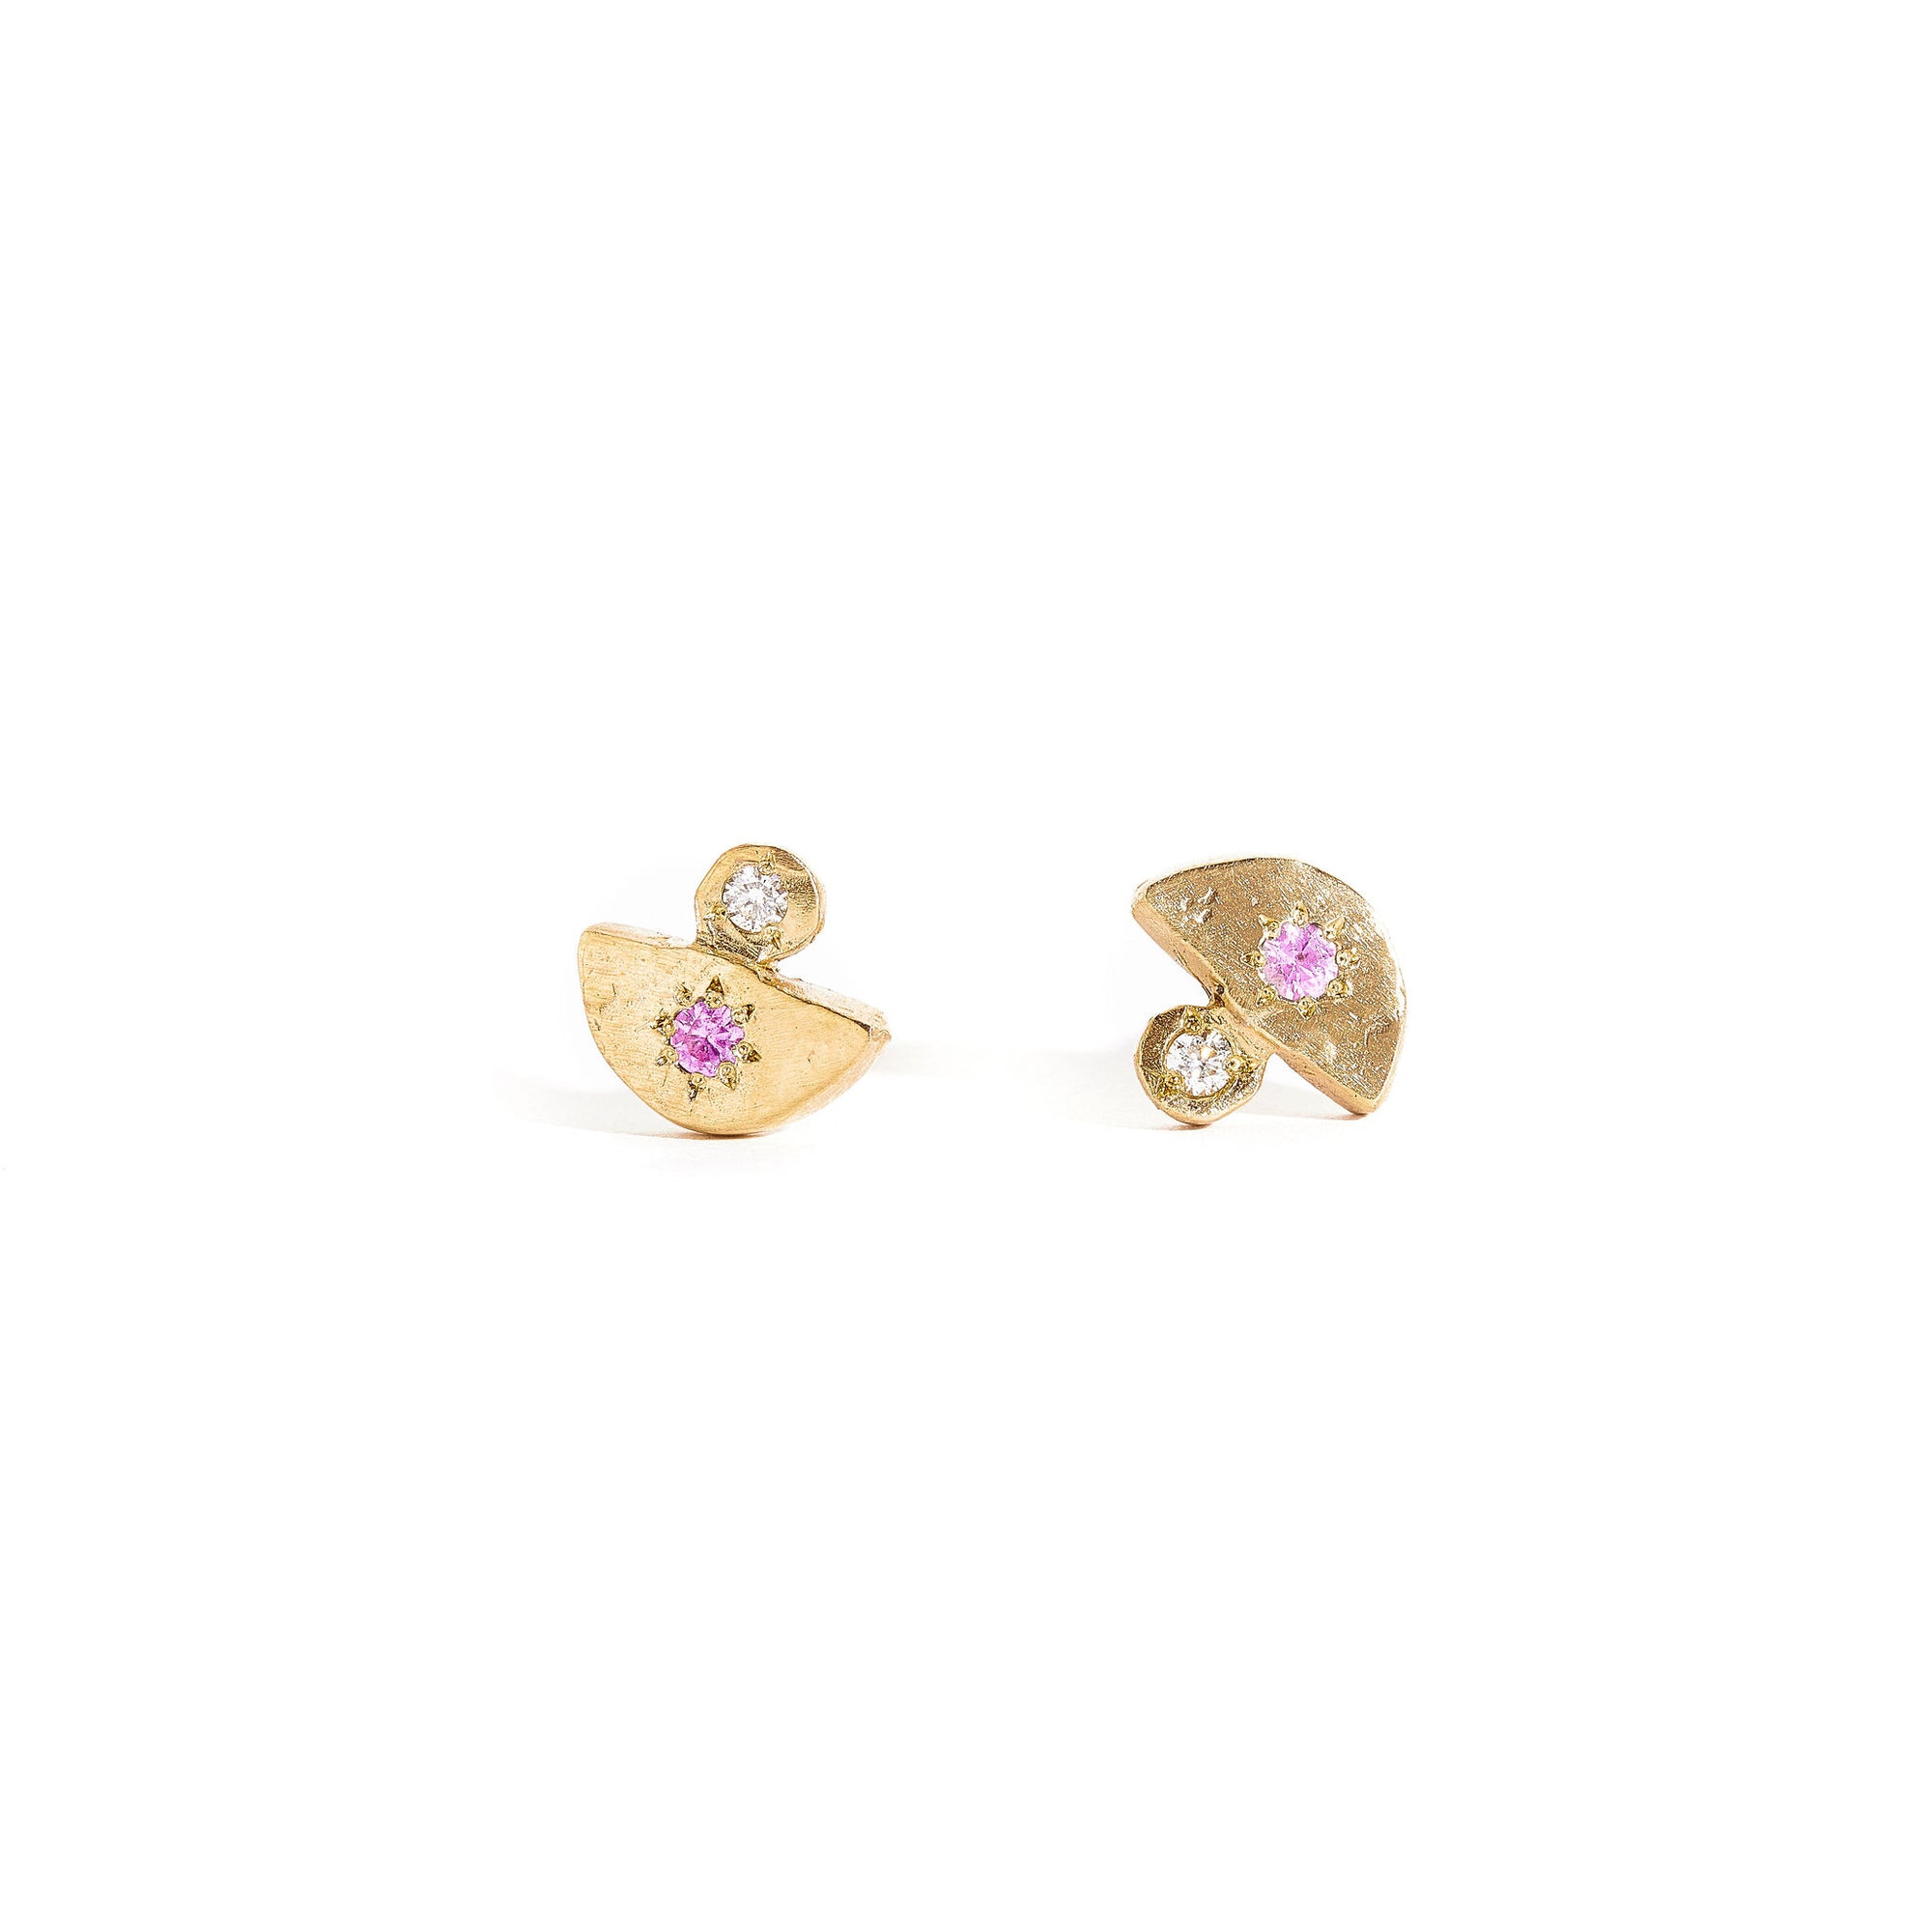 9 carat yellow gold earrings, each featuring a pink sapphire and white diamond. 